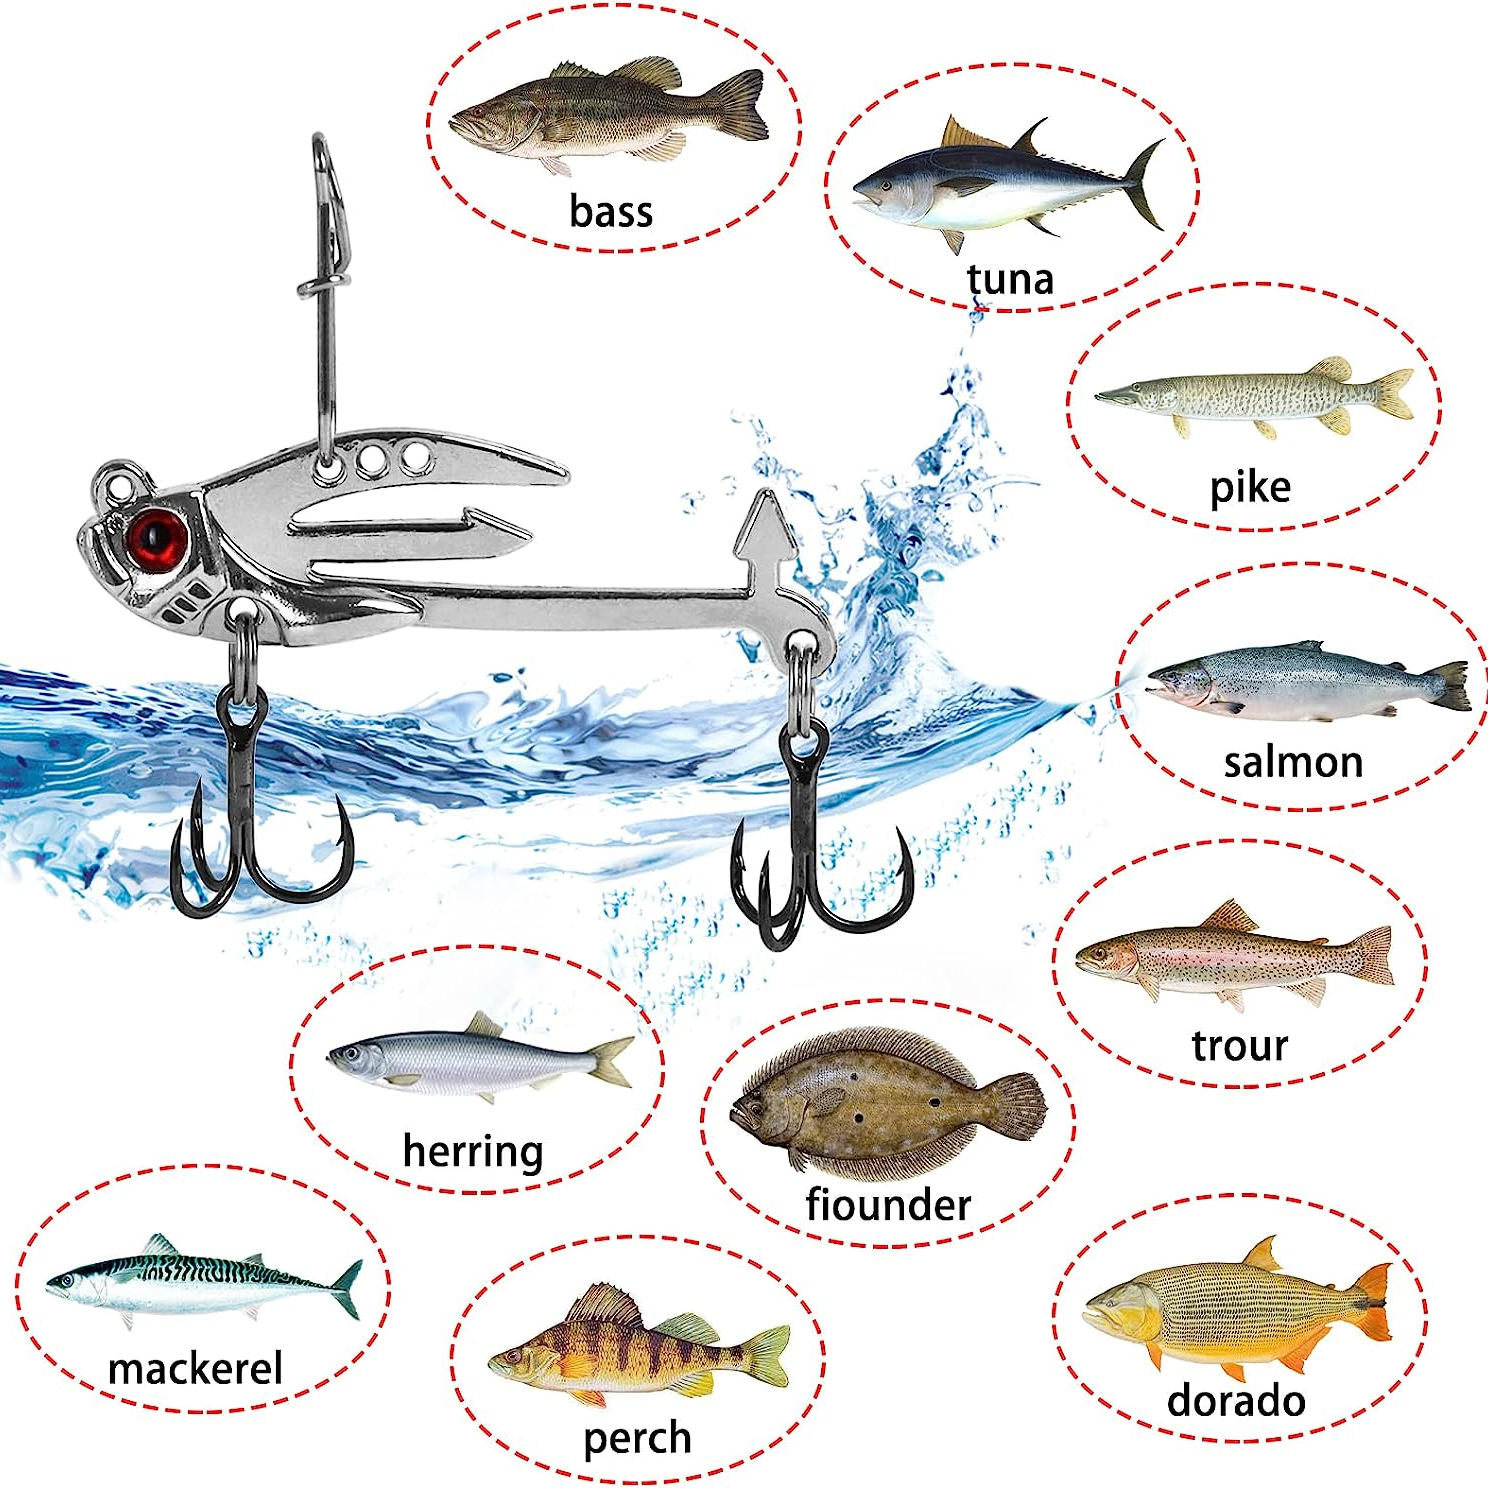 5pcs 5g Metal Vib Hard Blade Bait Fishing Spoon Lures for Bass, Walleye,  Trout, and Crappie in Freshwater and Saltwater